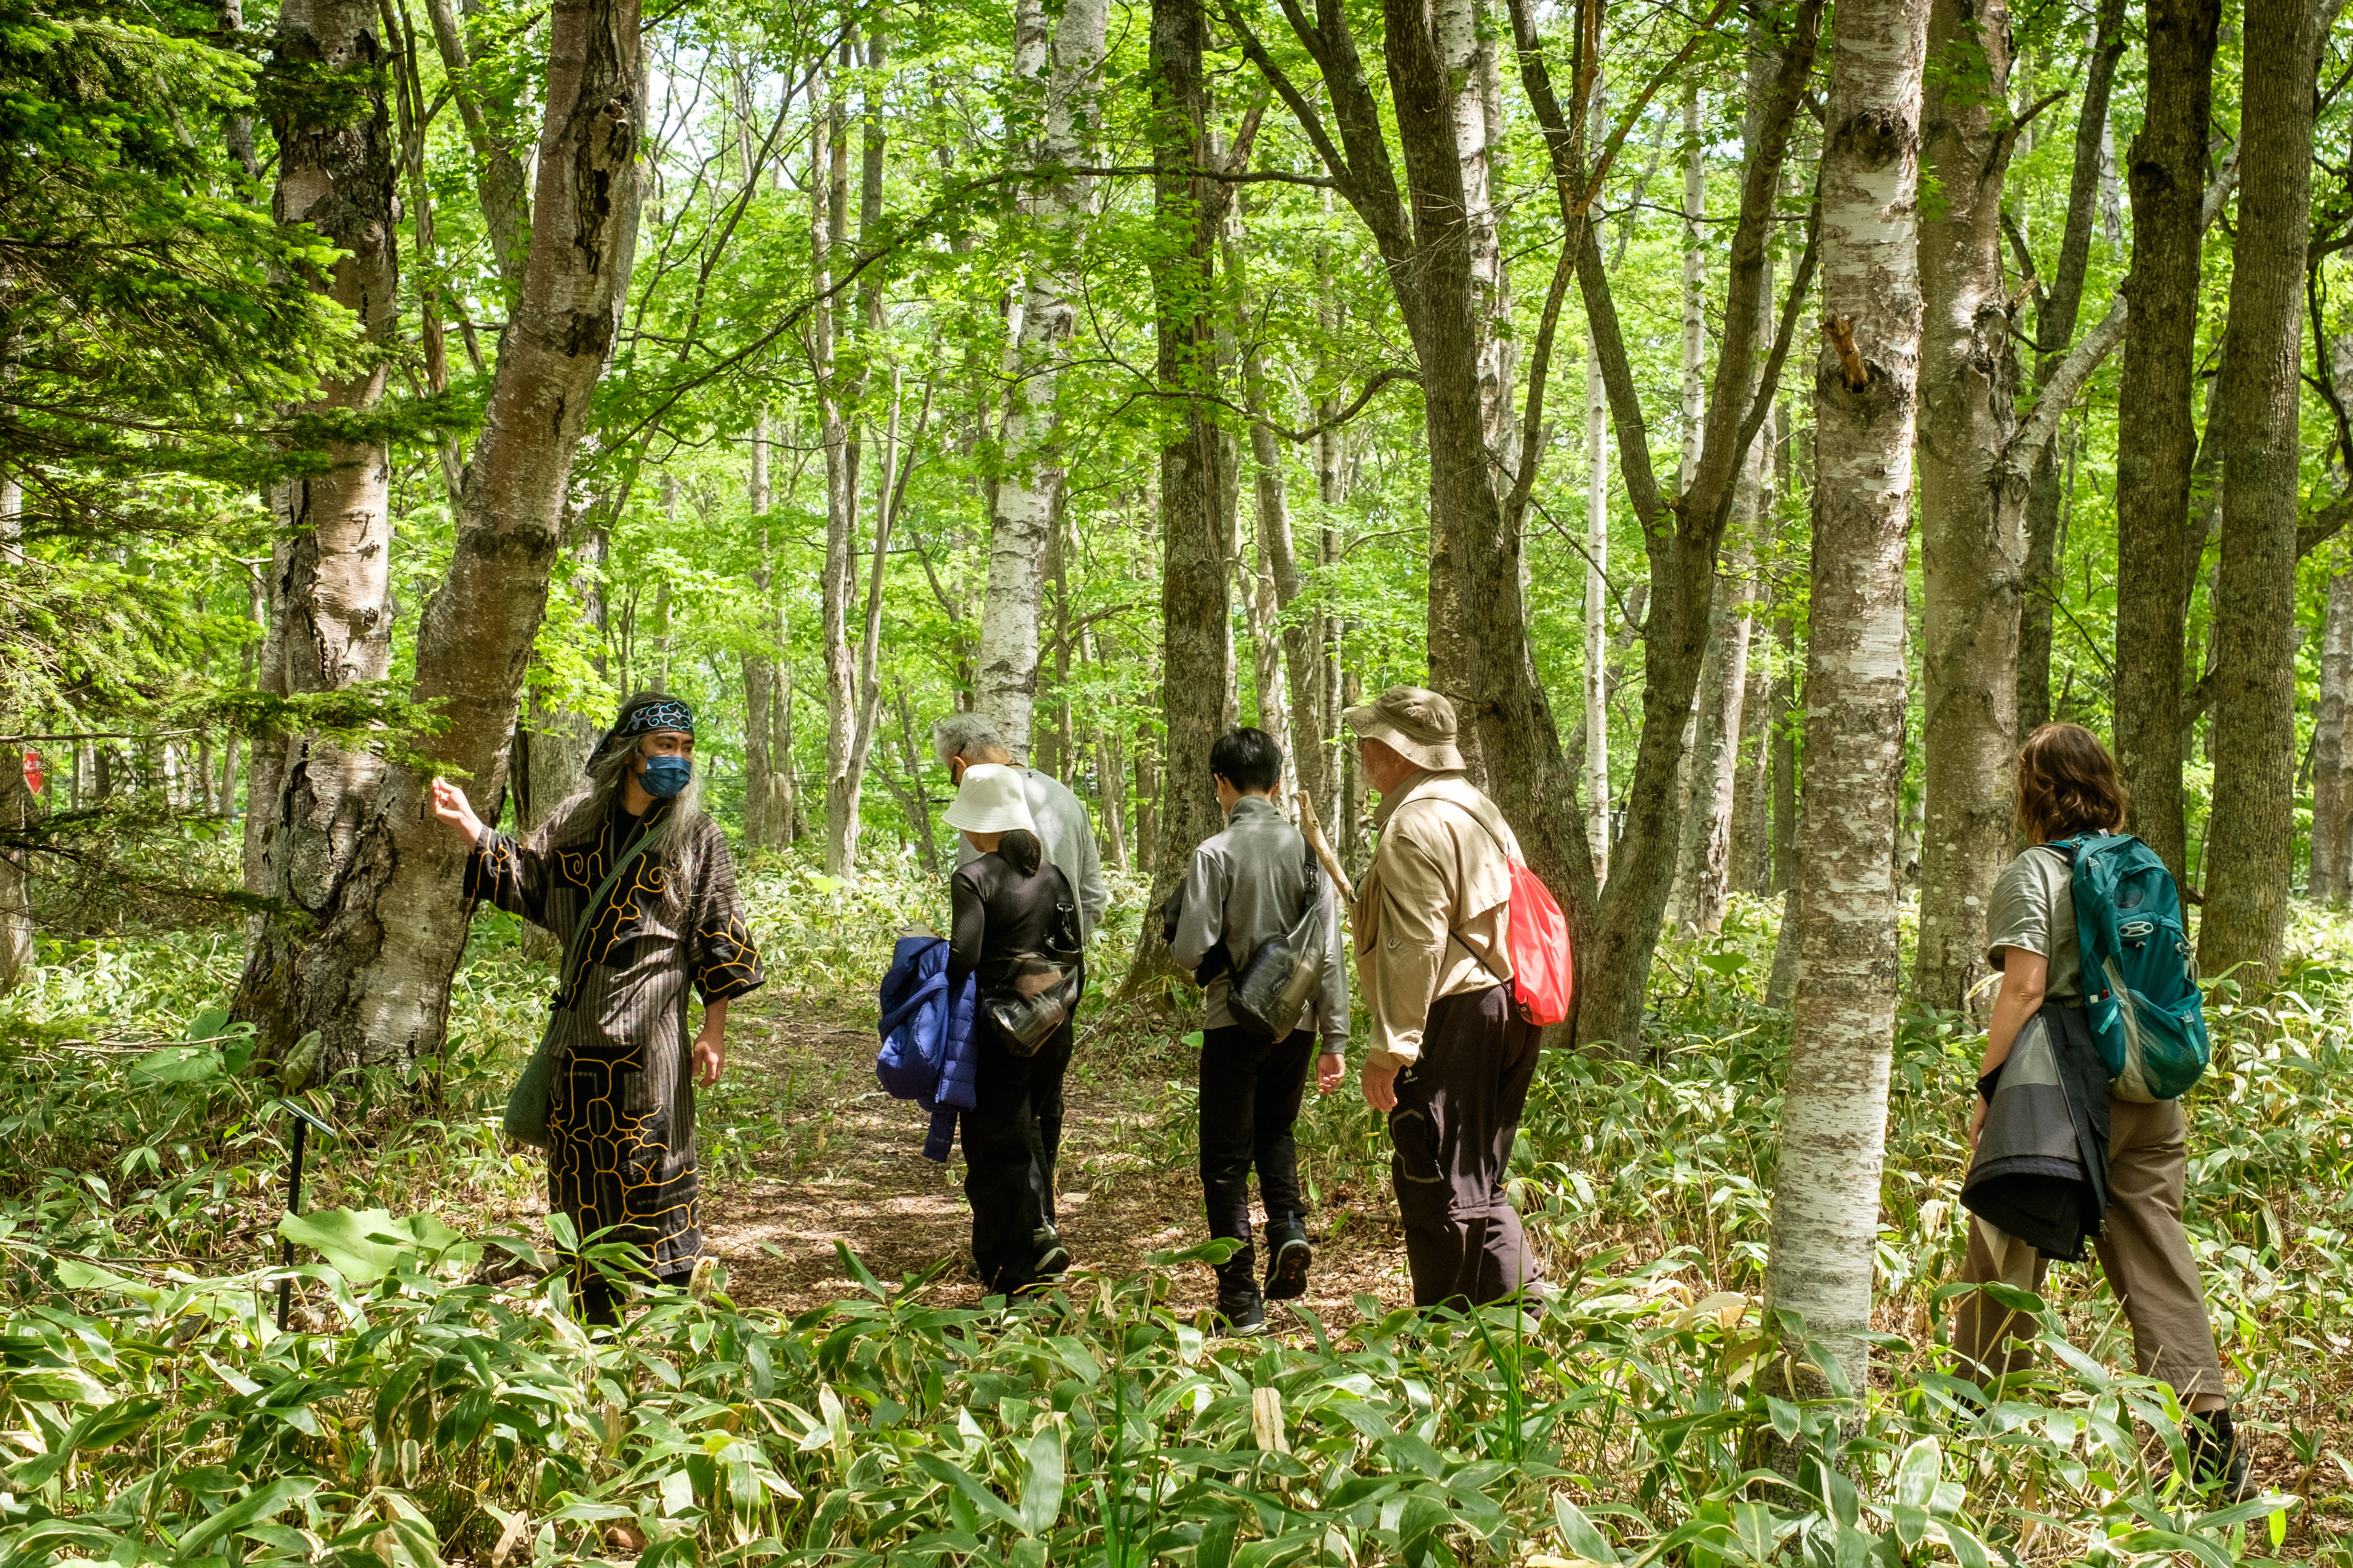 An Ainu guide in traditional garb leads a group of visitors through a forest.